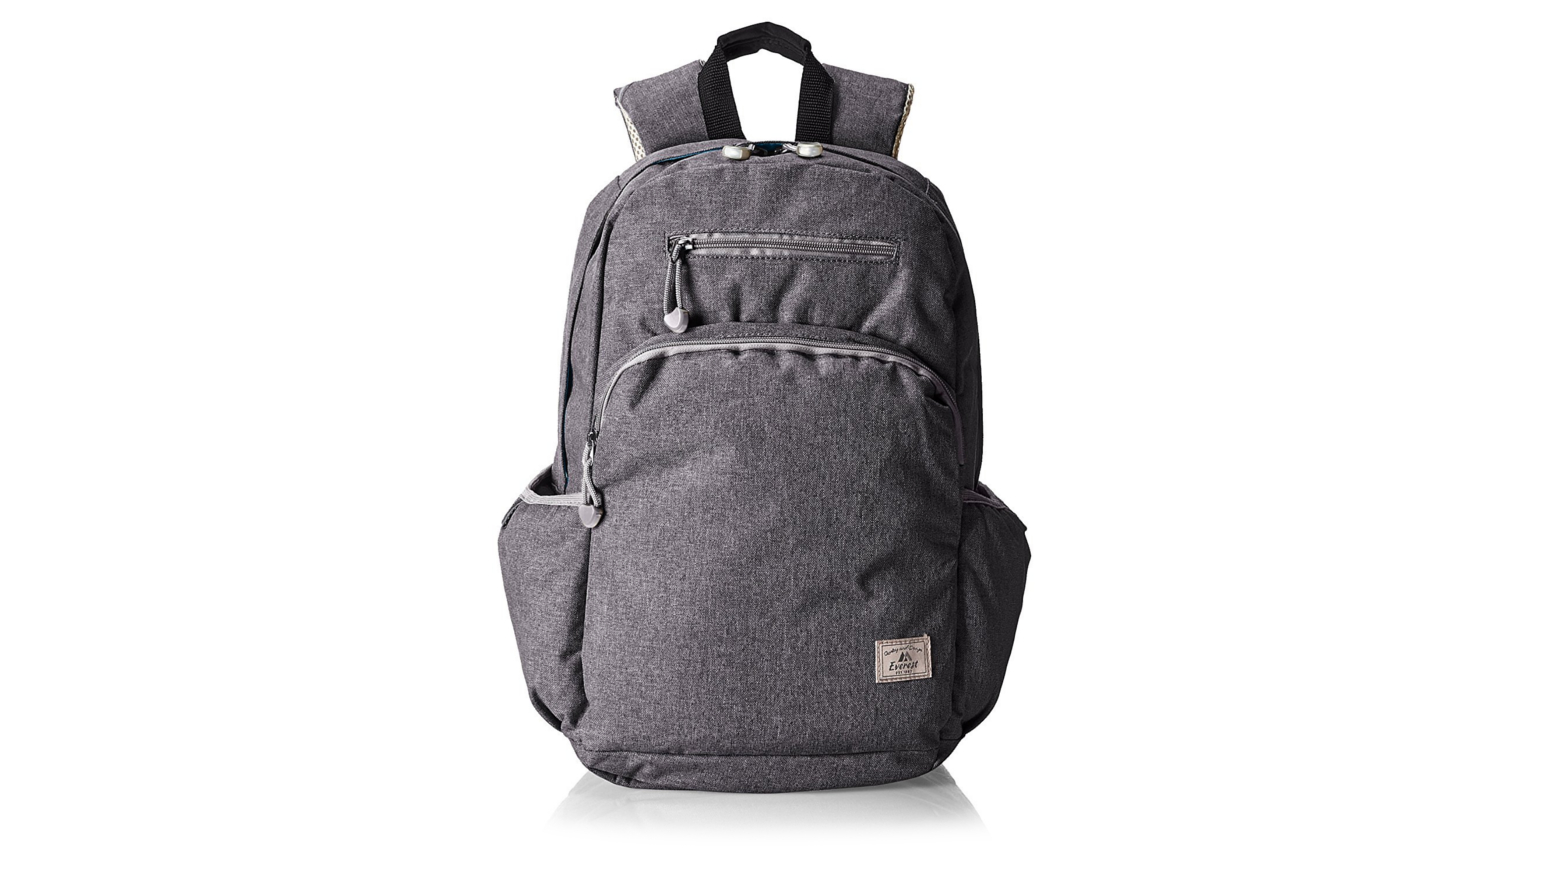 ACCO Brands Ultimate Tech Dark Gray Back Pack Five Star Backpack 73284